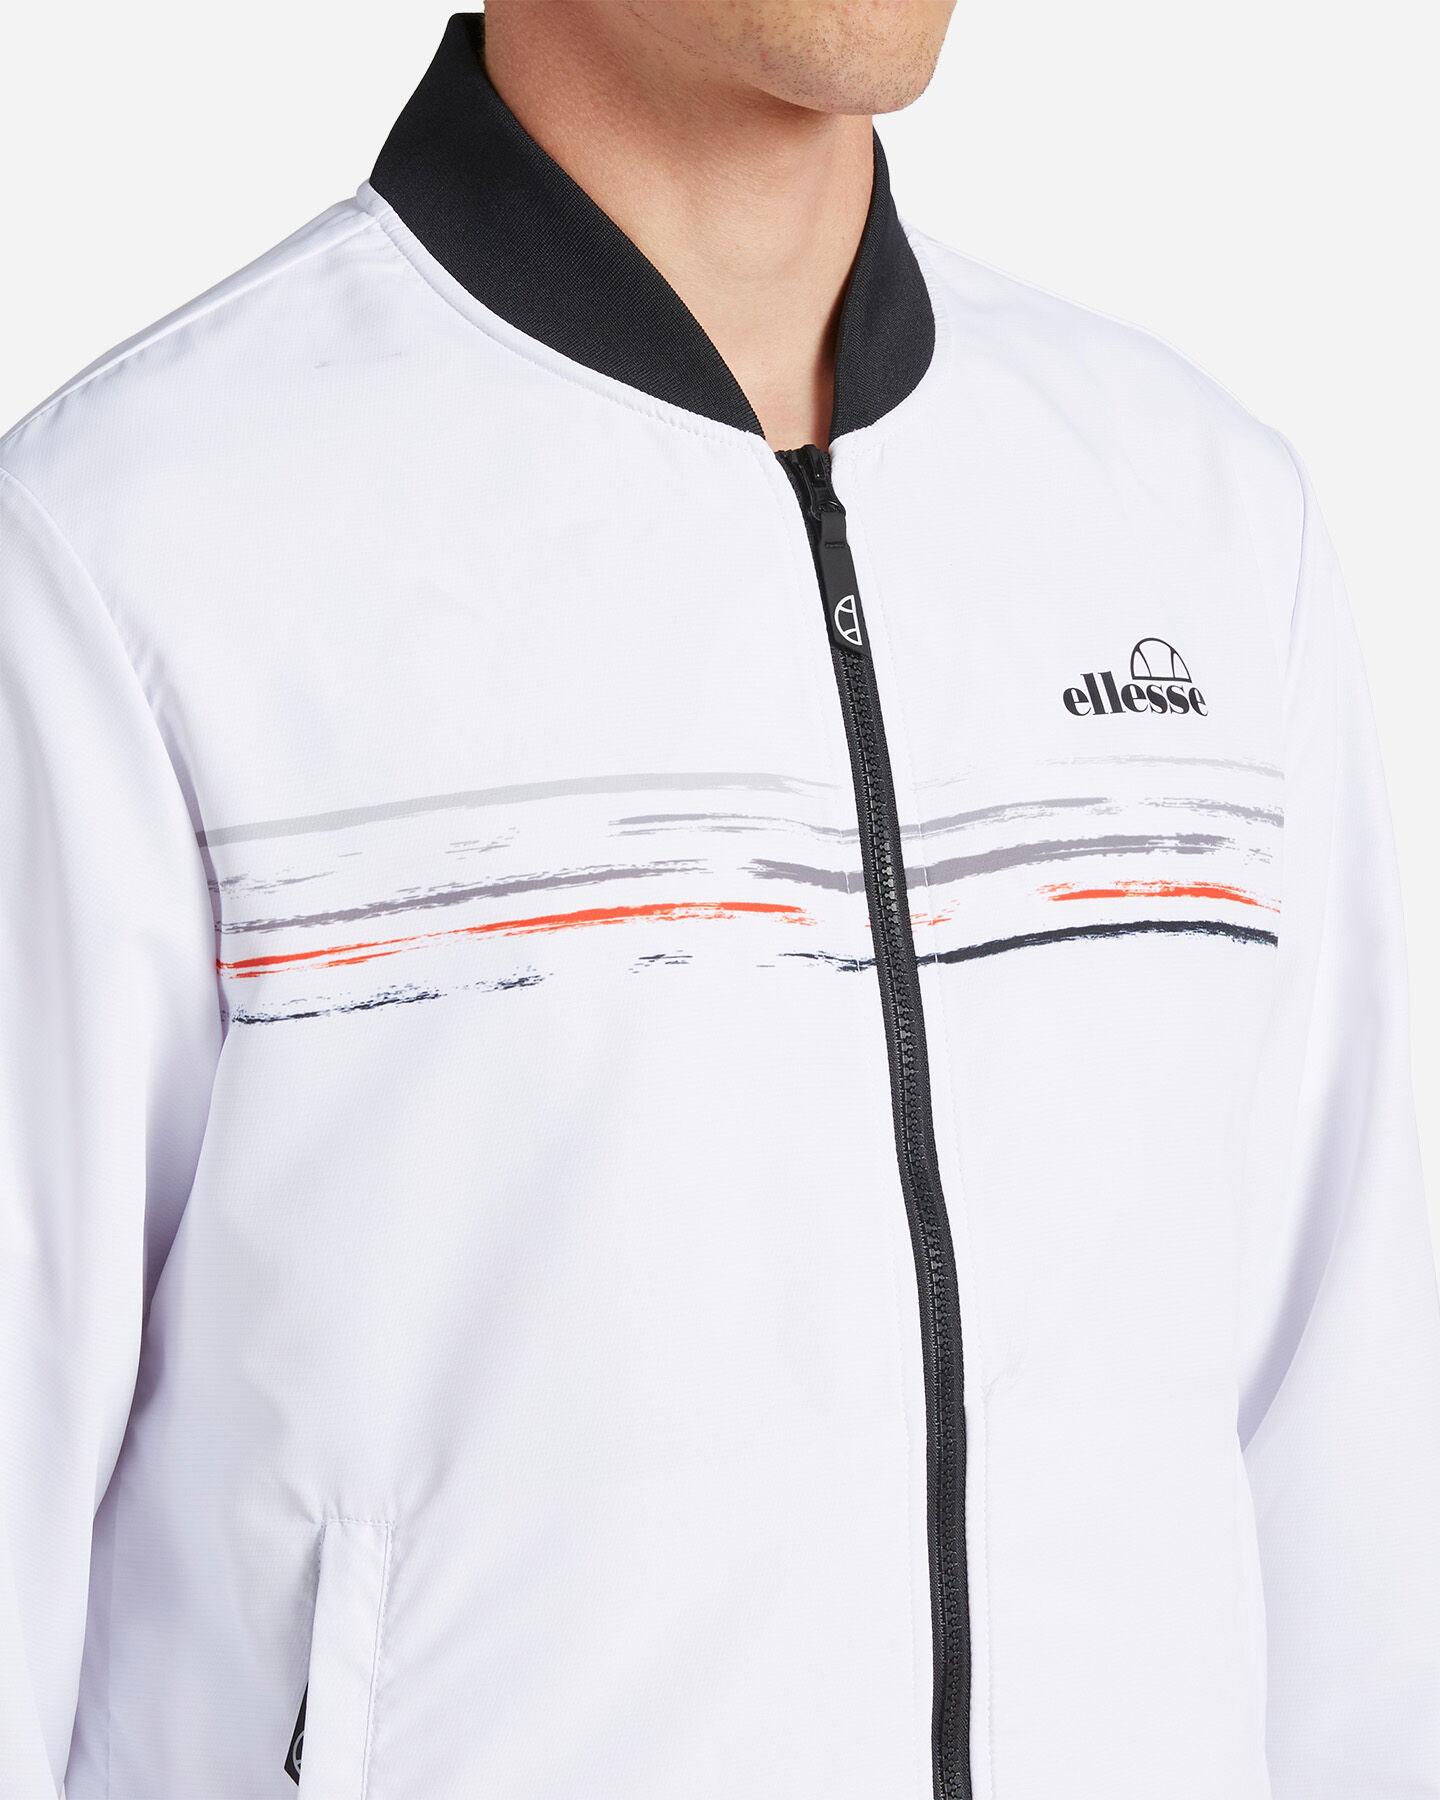  Giacca tennis ELLESSE FIVE STRIPES M S4117569|001|S scatto 4